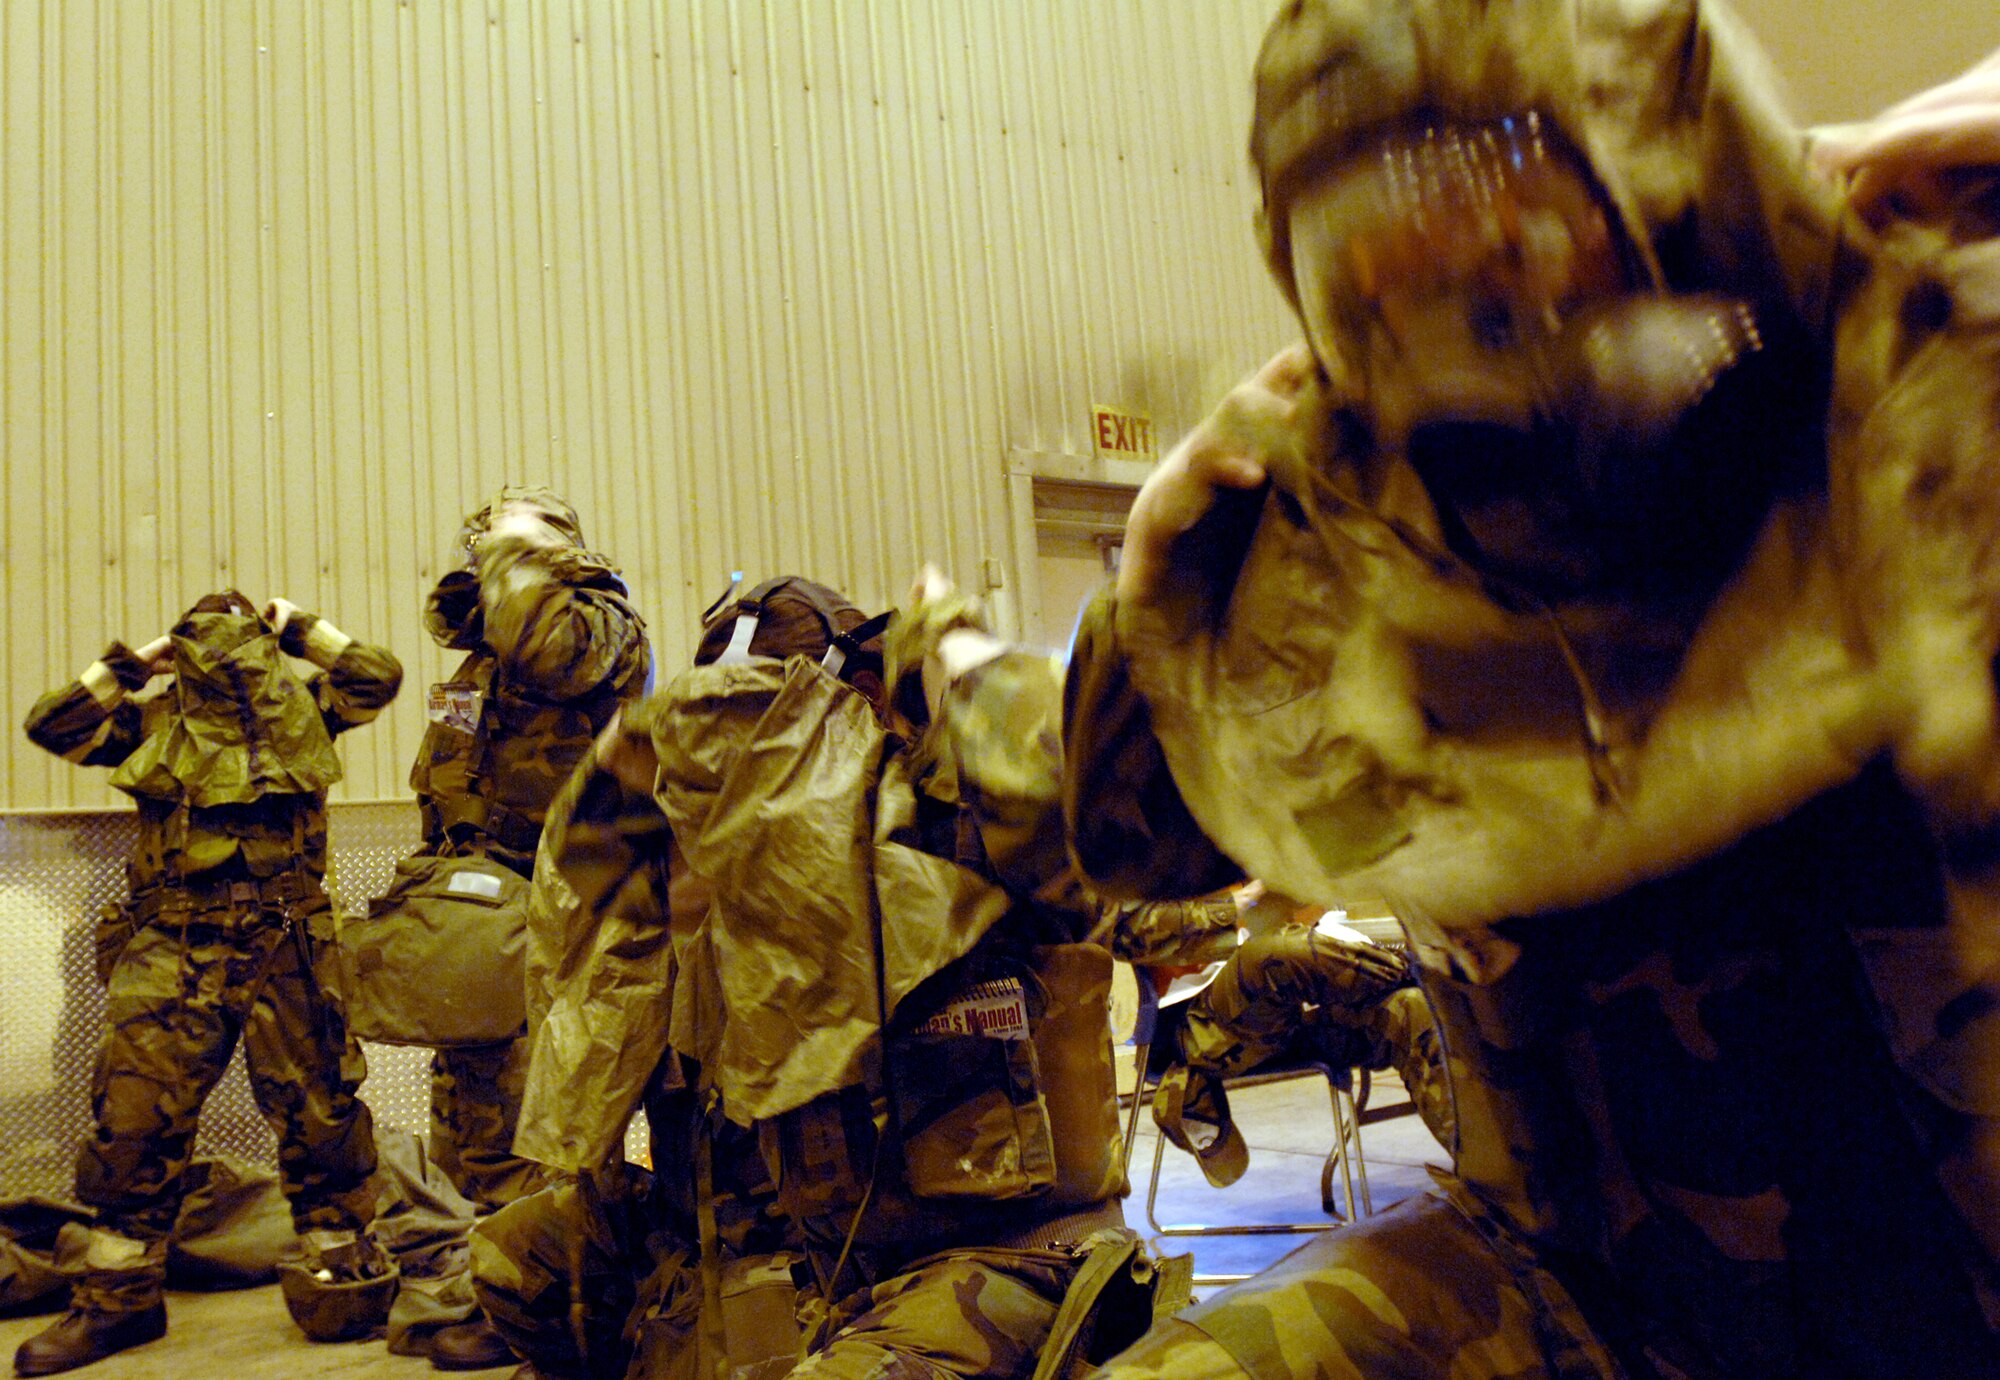 Airman First Class Christopher Matlock (right) along with other members of the 354th Fighter Wing hurry to don their gas masks  within the 15 second time limit while being evaluated during the Ability To Survive and Operate (ATSO) portion of the Golden Raven Operational Readiness Exercise on March 9, 2008 at Eielson Air Force Base, Alaska.  The Golden Raven Operational Readiness Exercise is an evaluation of the 354th Fighter Wing's ability to prepare and deploy personnel, equipment and support assets to a combat environment. The exercise consists of four graded areas: initial response and deployment, employment, ability to survive and operate (ATSO) and combat response.

(U.S Air Force photo by Staff Sgt. Eric T. Sheler)

